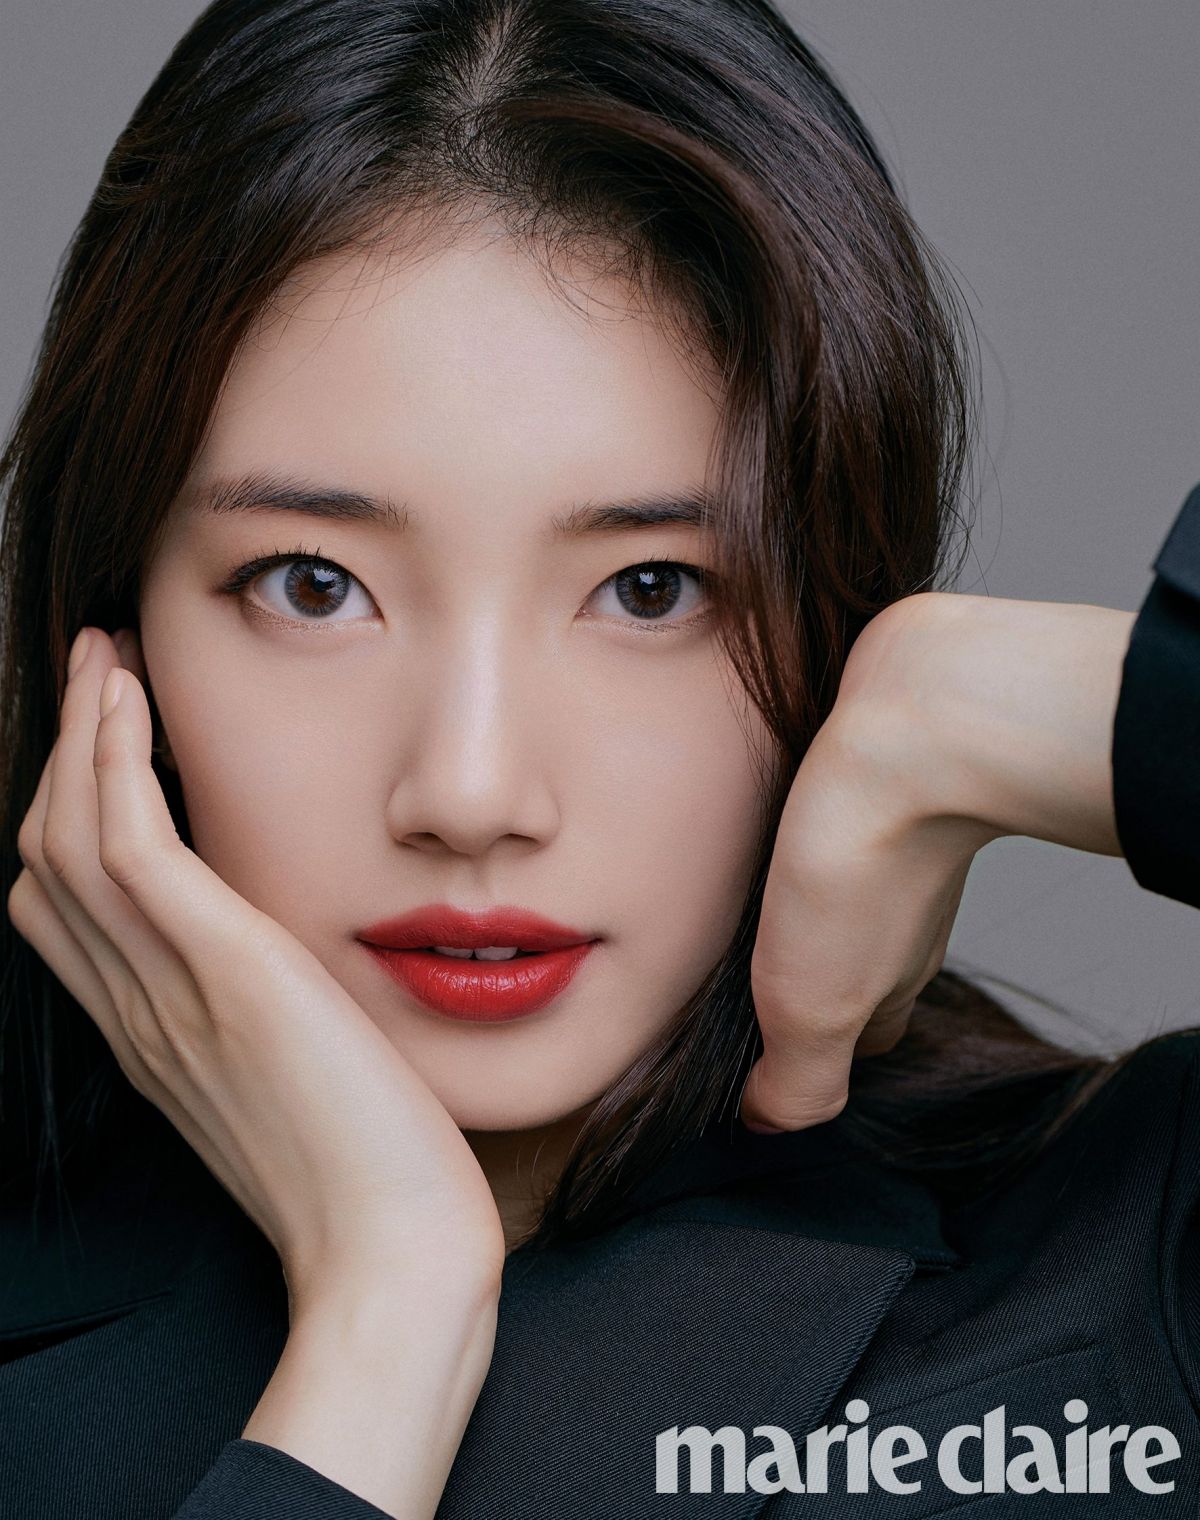 BAE SUZY in Marie Claire Magazine, March 2020 6 - allkpop forums